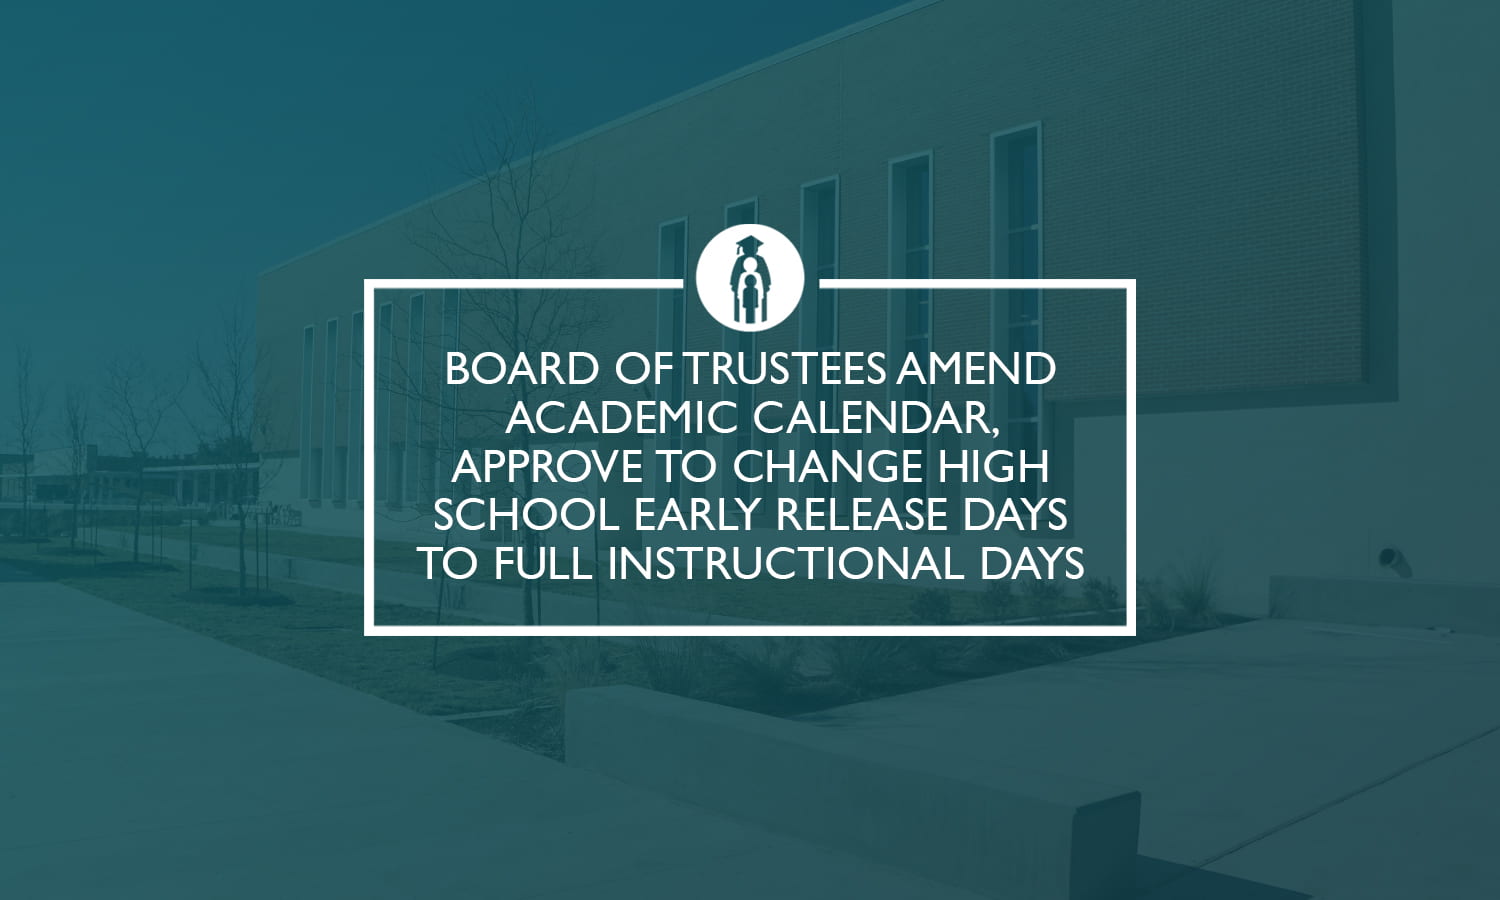 Board of Trustees amend academic calendar, approve to